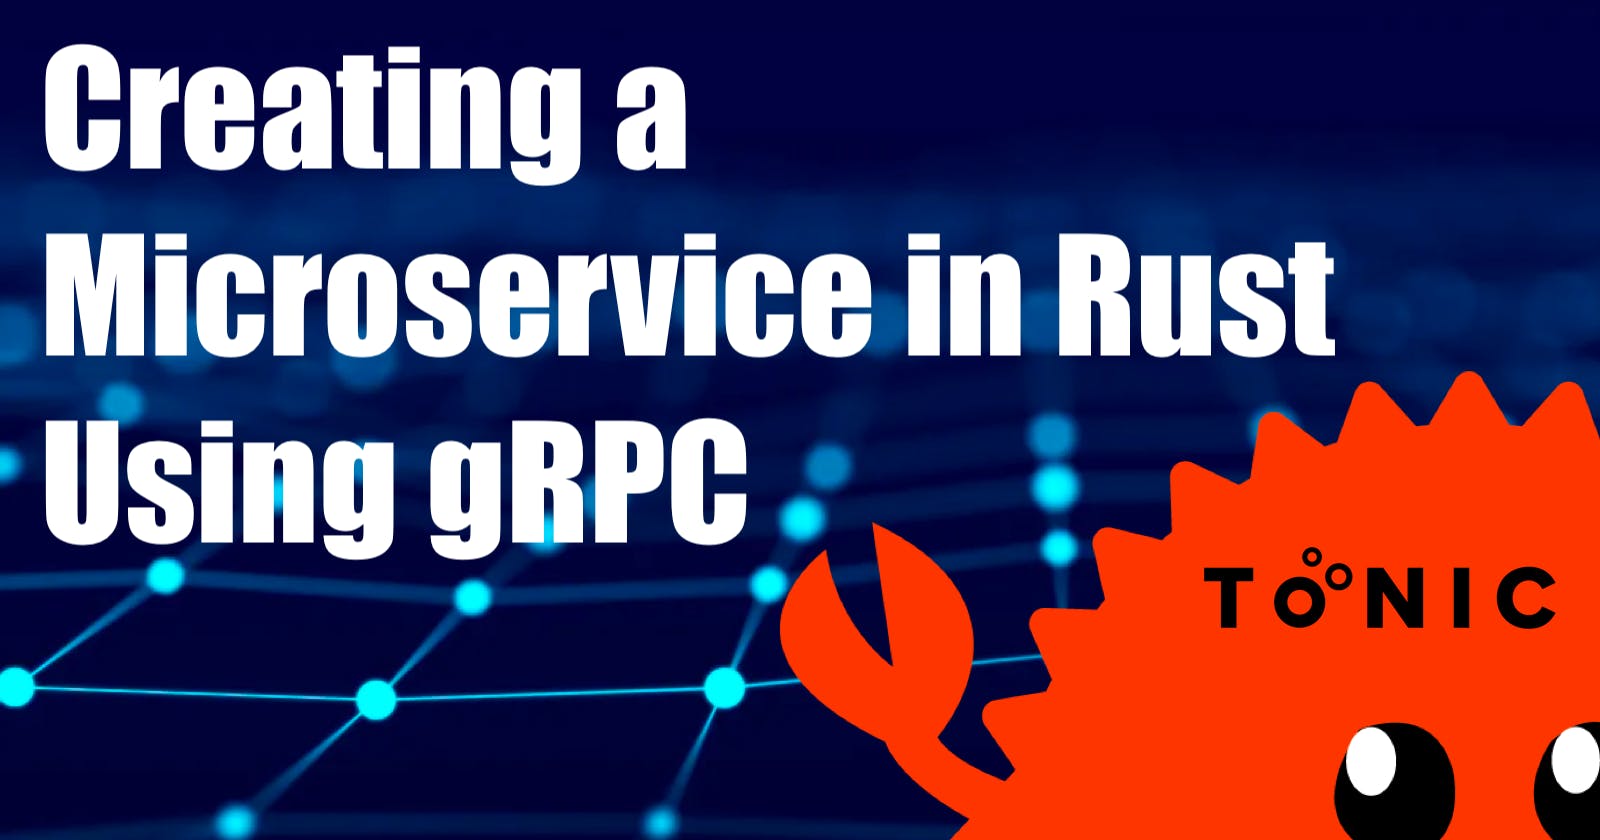 Creating a Microservice in Rust Using gRPC